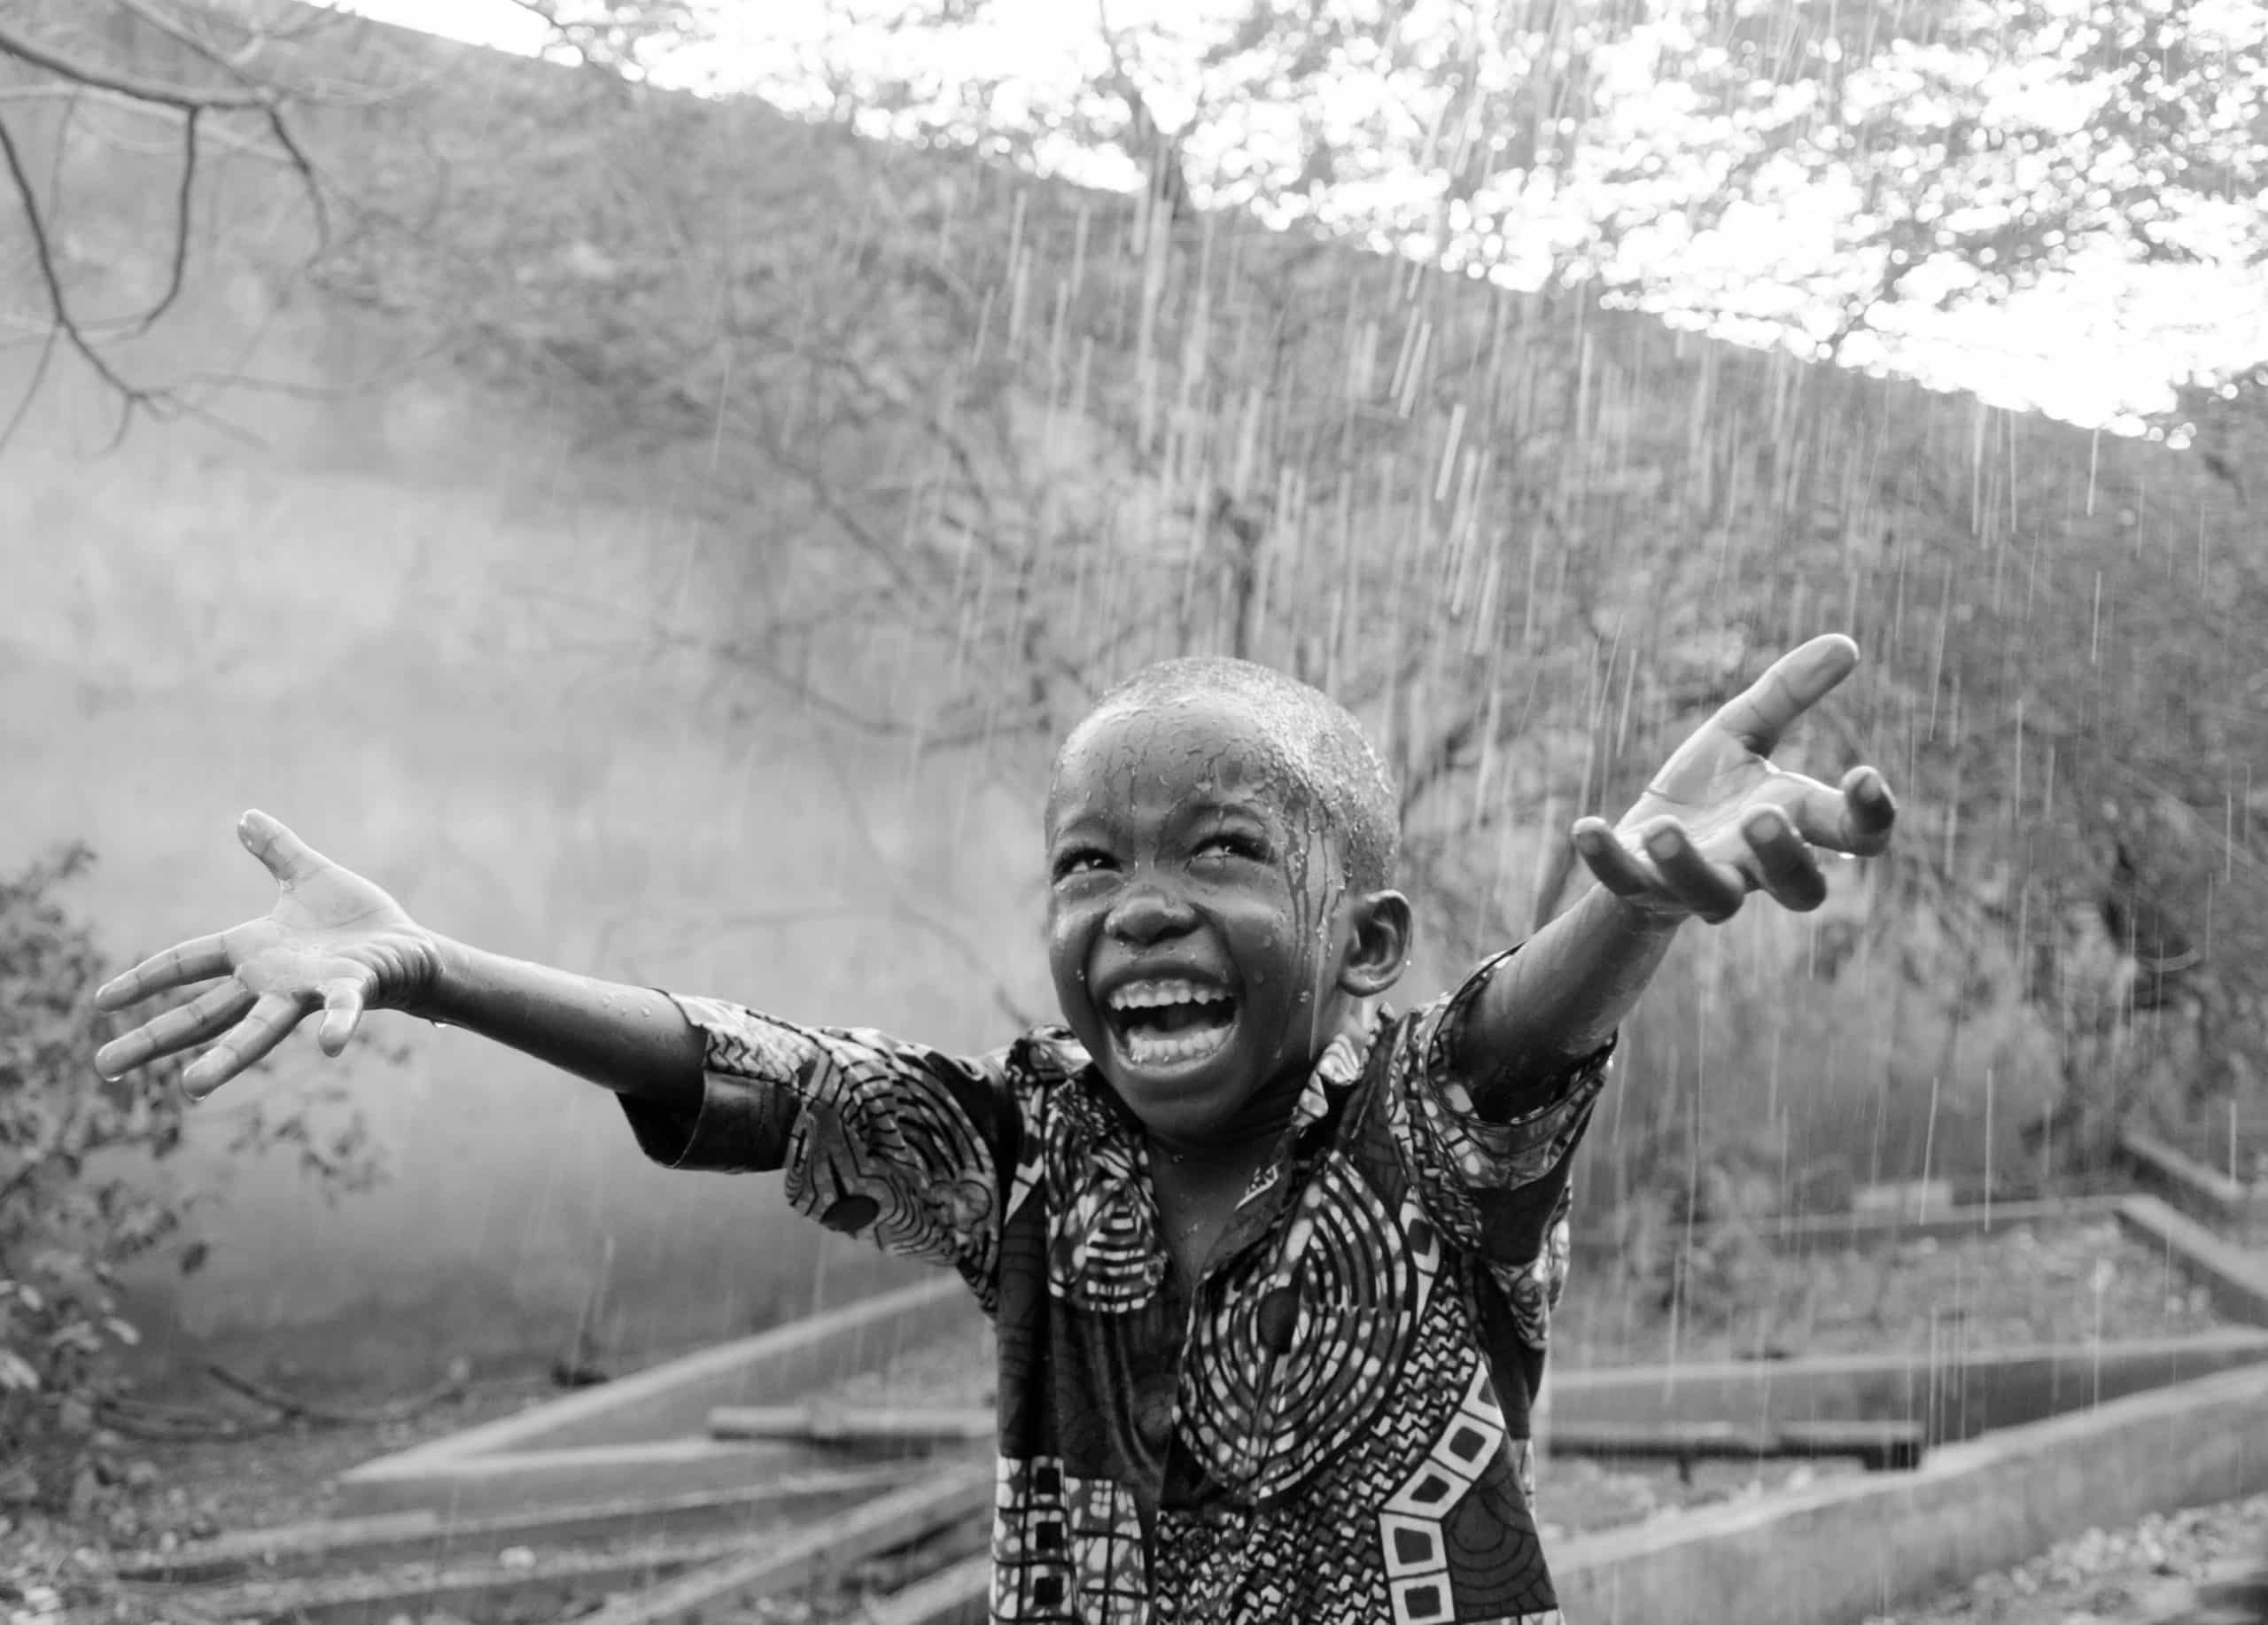 African child stretching out his arms in the rain.